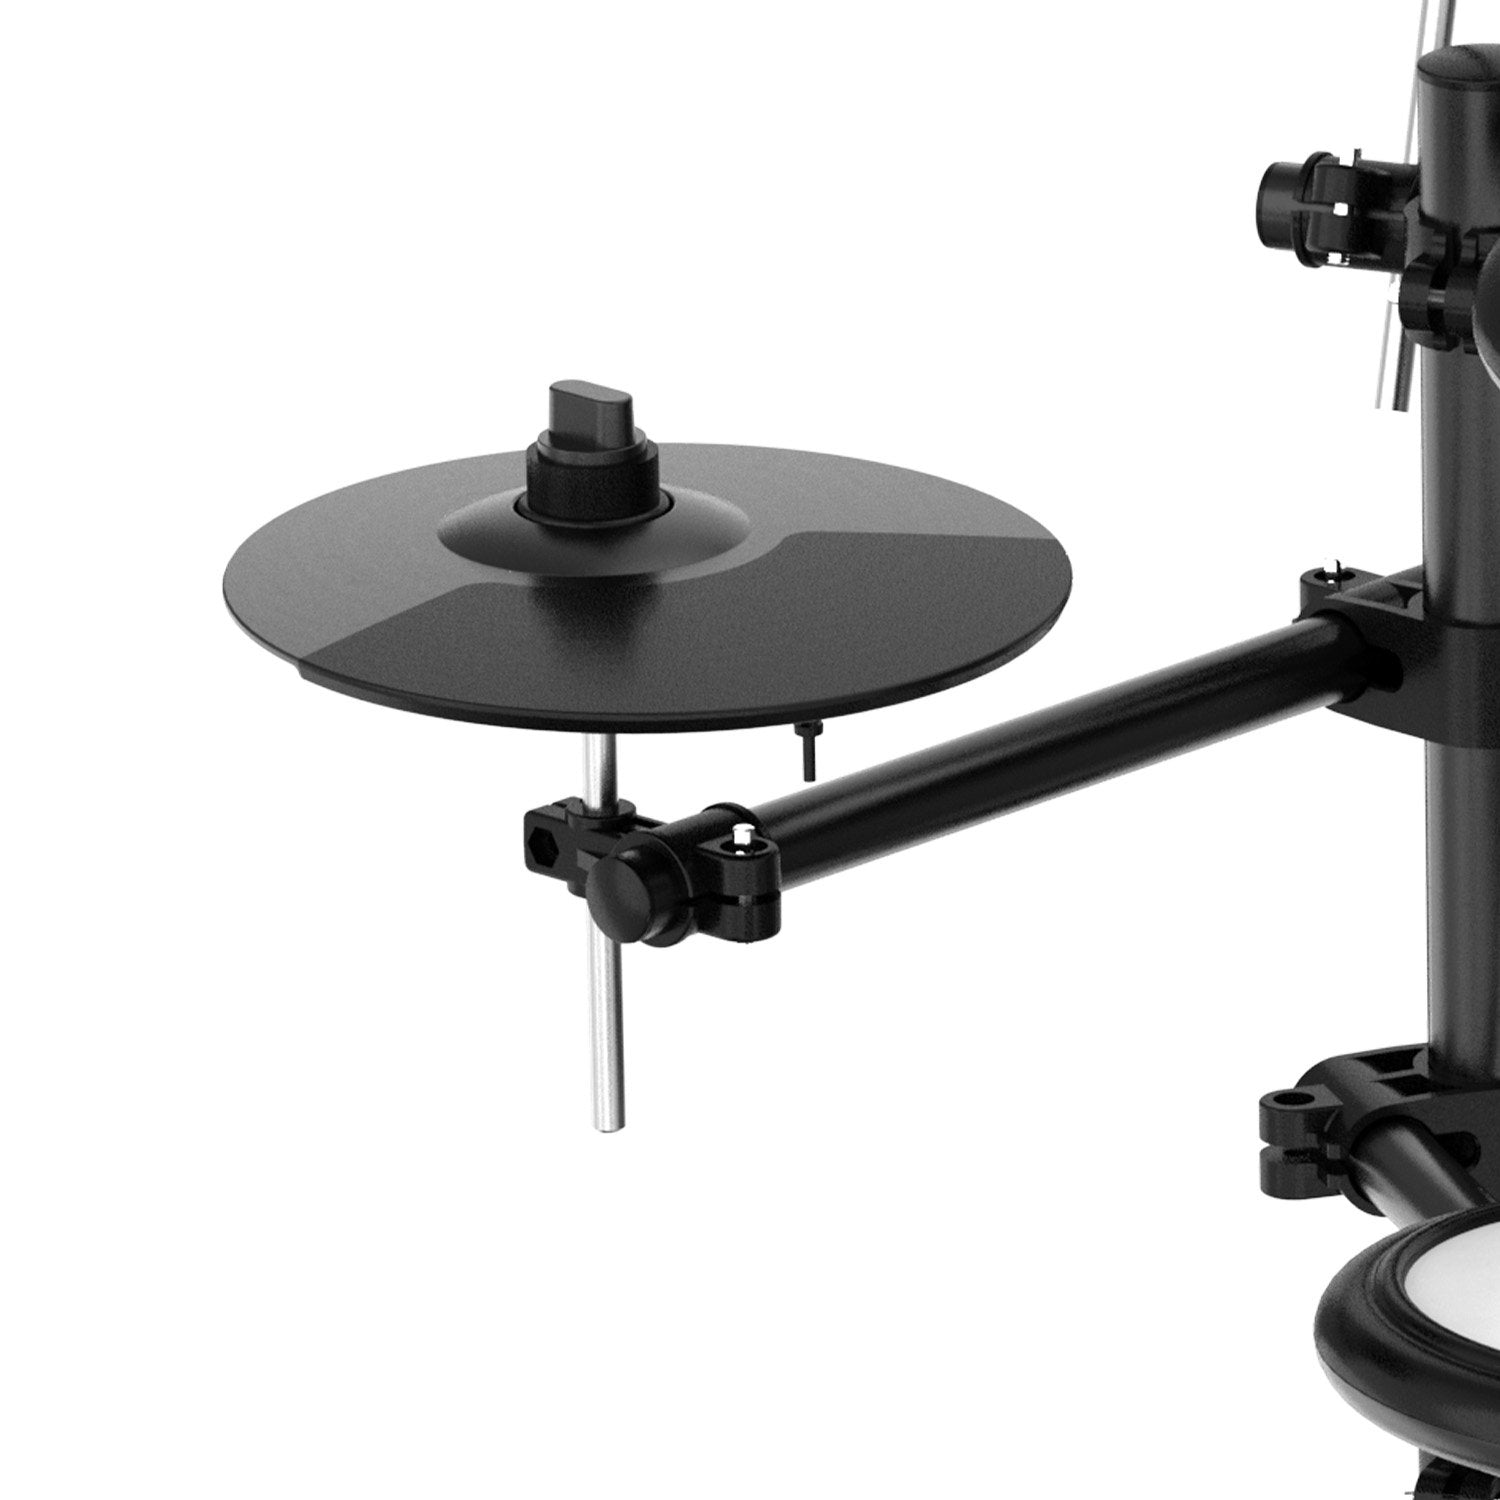 Electronic Drum Kit with Pedals